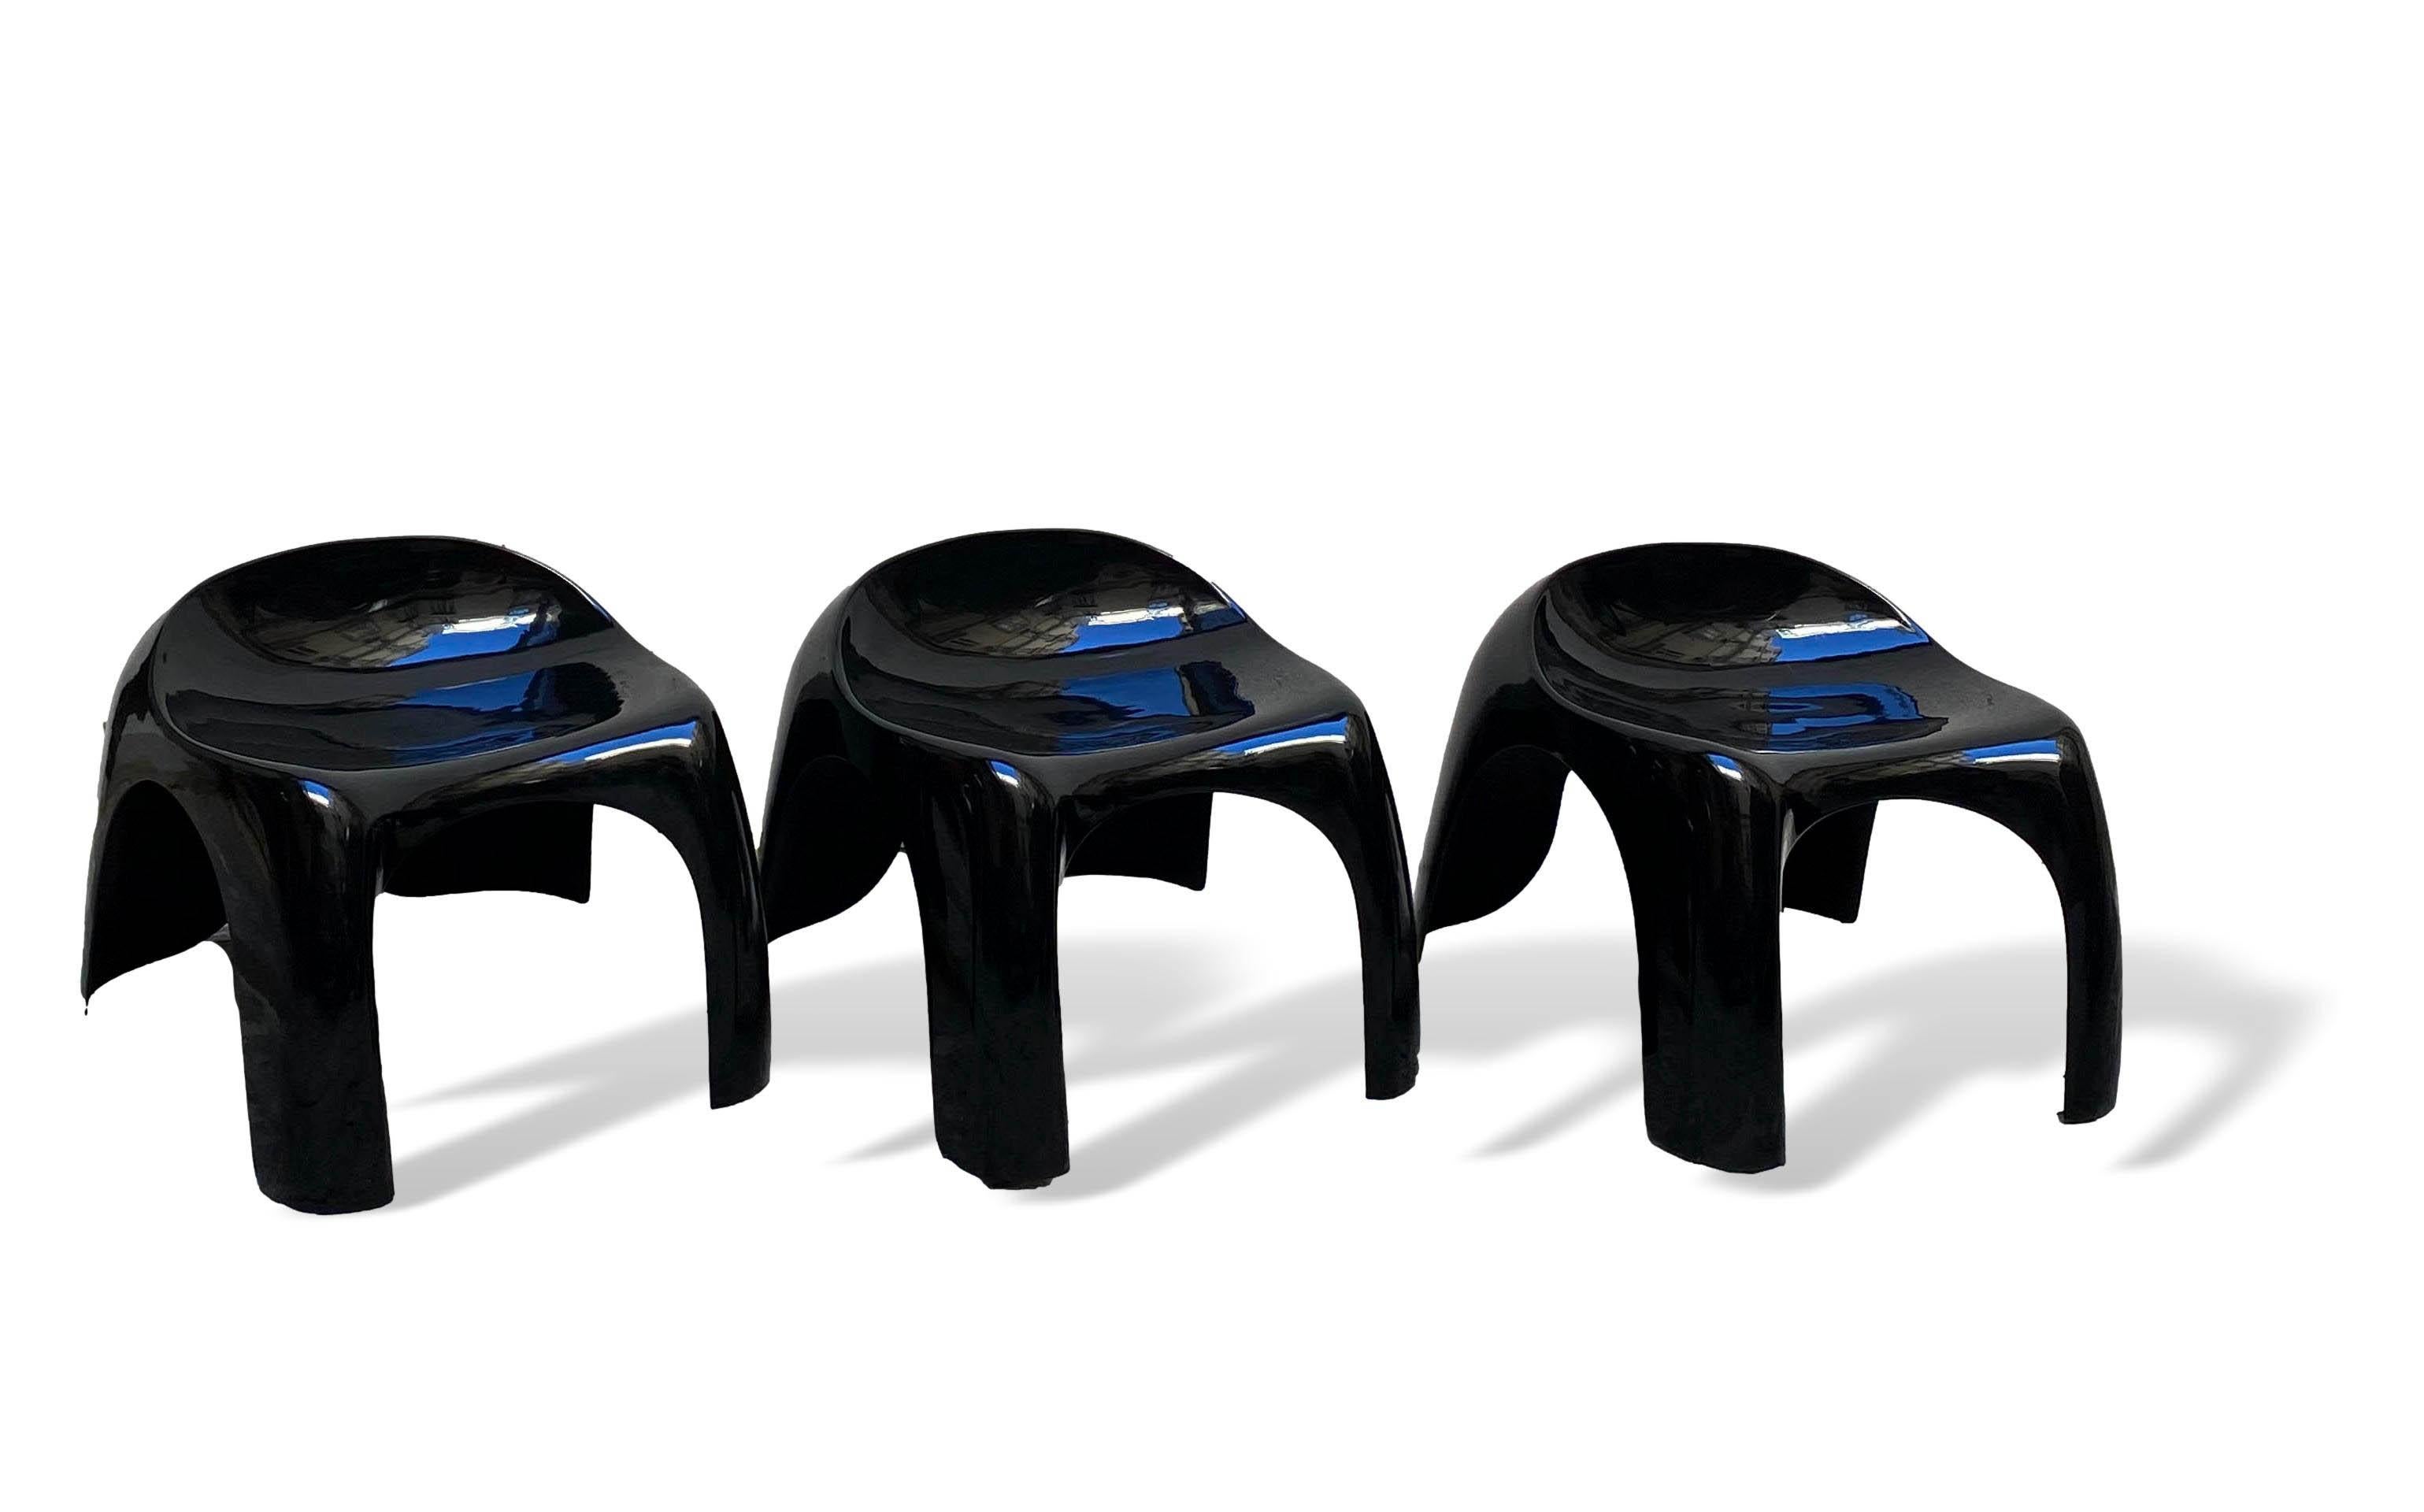 Group of 3 low stools Mod. Efebo - designer Stacy Dukes - production Artemide - years 1966- black color in polyethylene material.